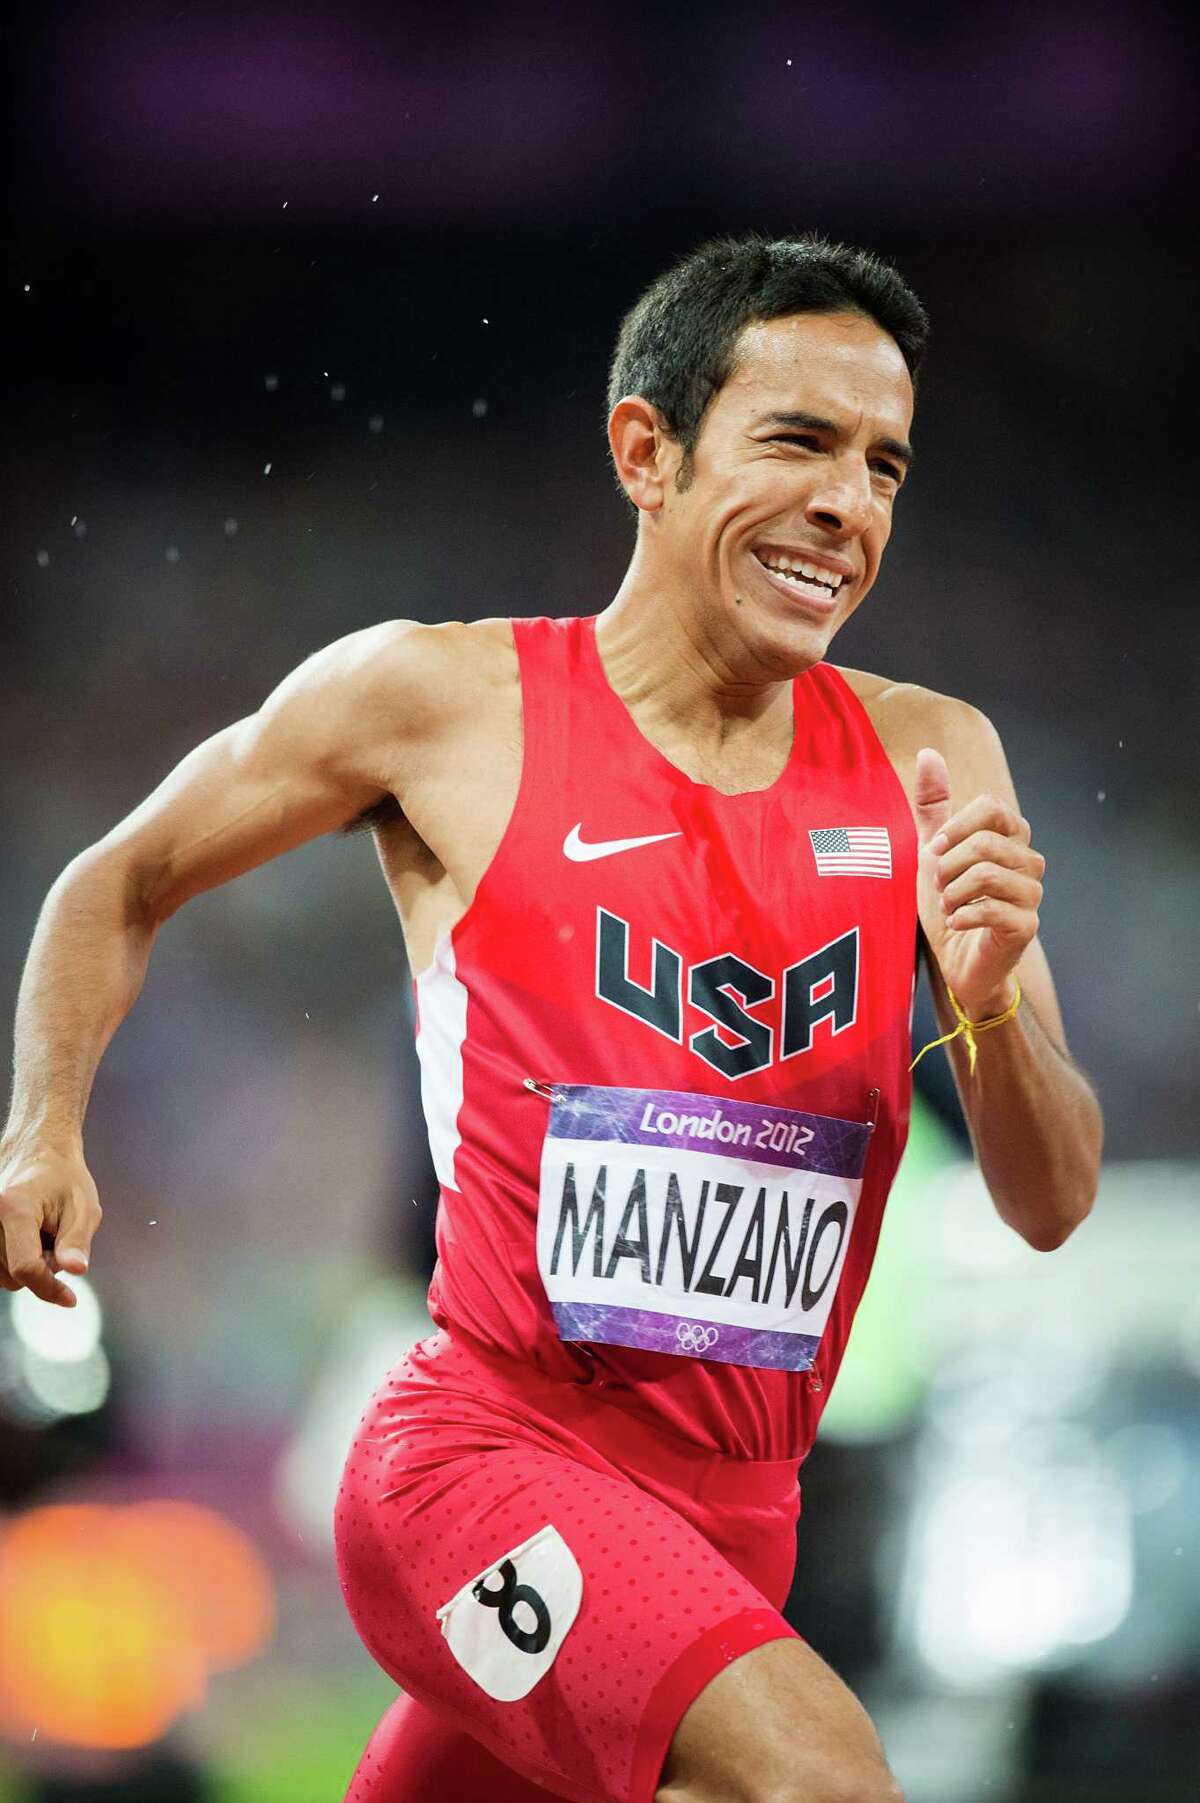 Leo Manzano of the USA runs in the men's 1,500-meters final during at the 2012 London Olympics on Tuesday, Aug. 7, 2012. Manzano, a former Texas Longhorn from Marble Falls, took the silver medal in the event. It was the first medal won by the USA in the event in 44 years. The last medal was won by Jim Ryun took the silver at the Mexico City Games in 1968.